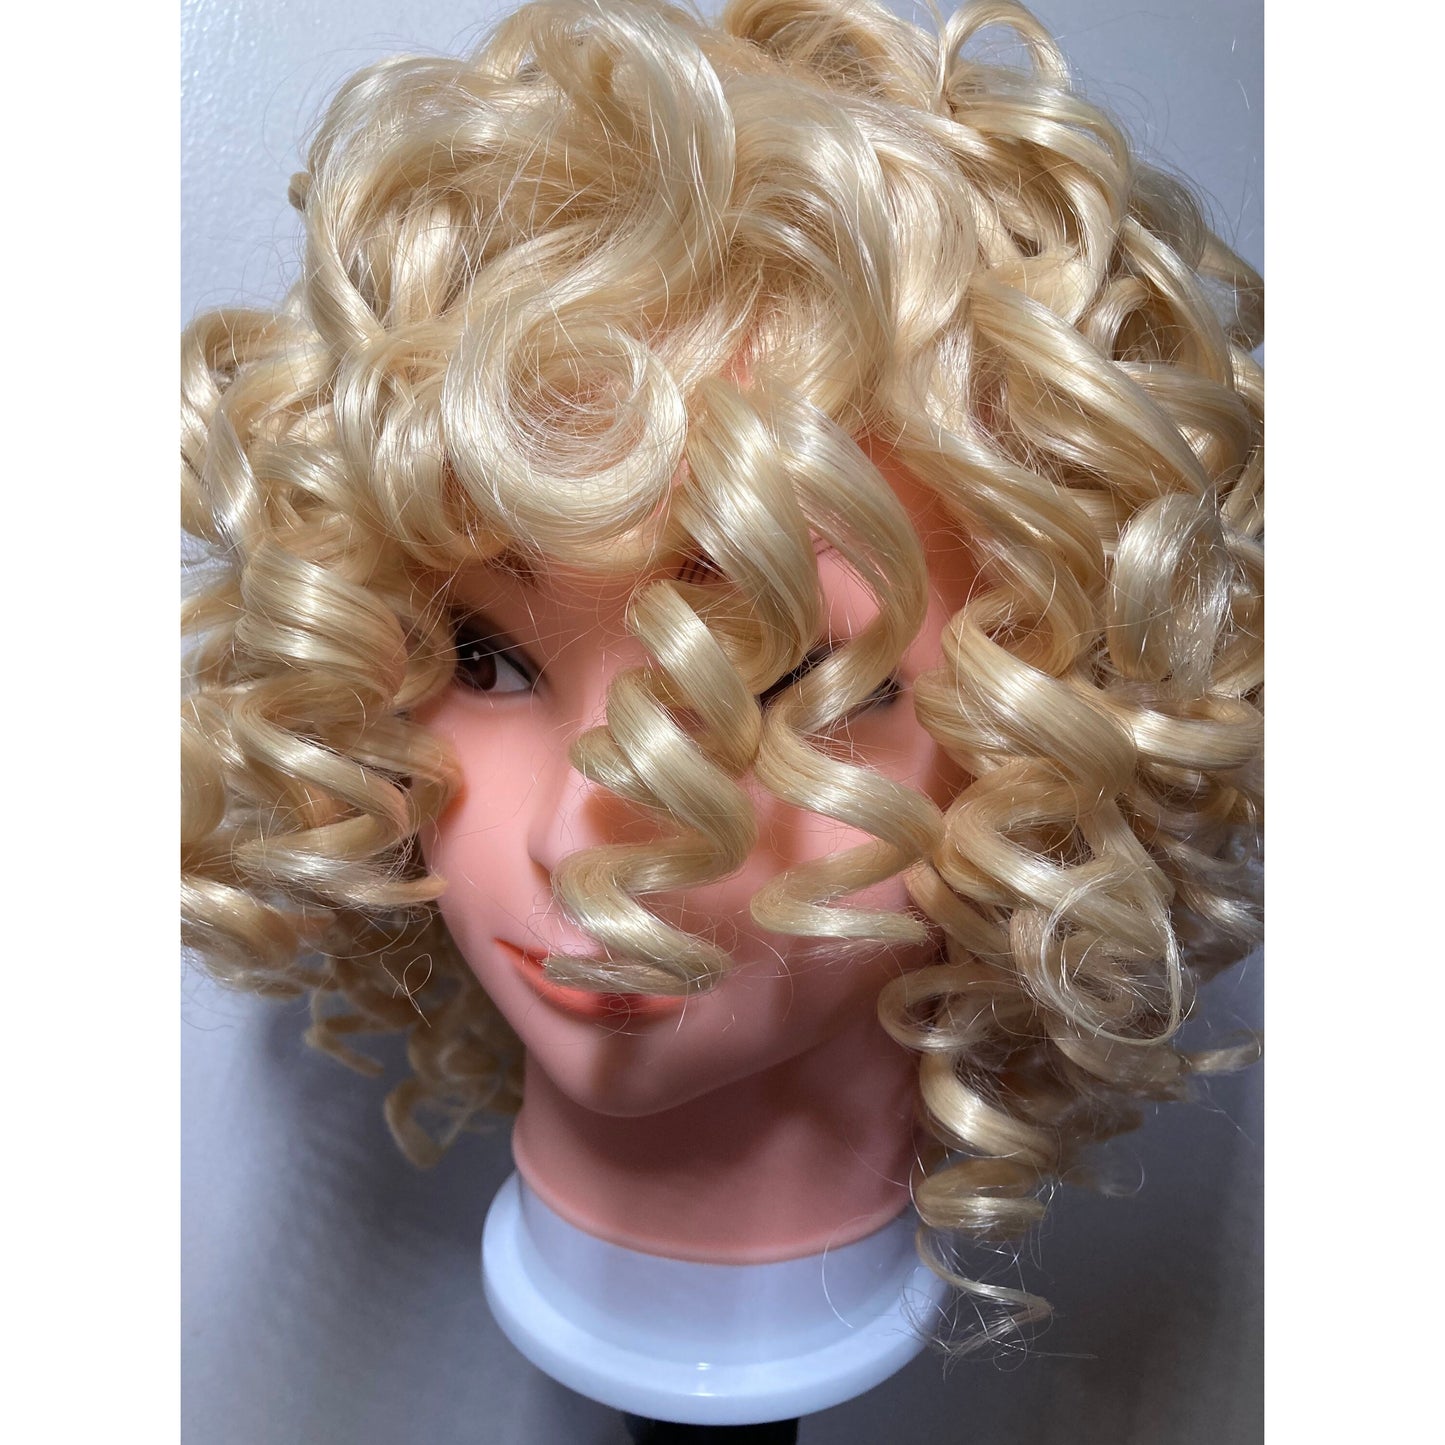 14inch AFRO Blonde Big Curly Wigs